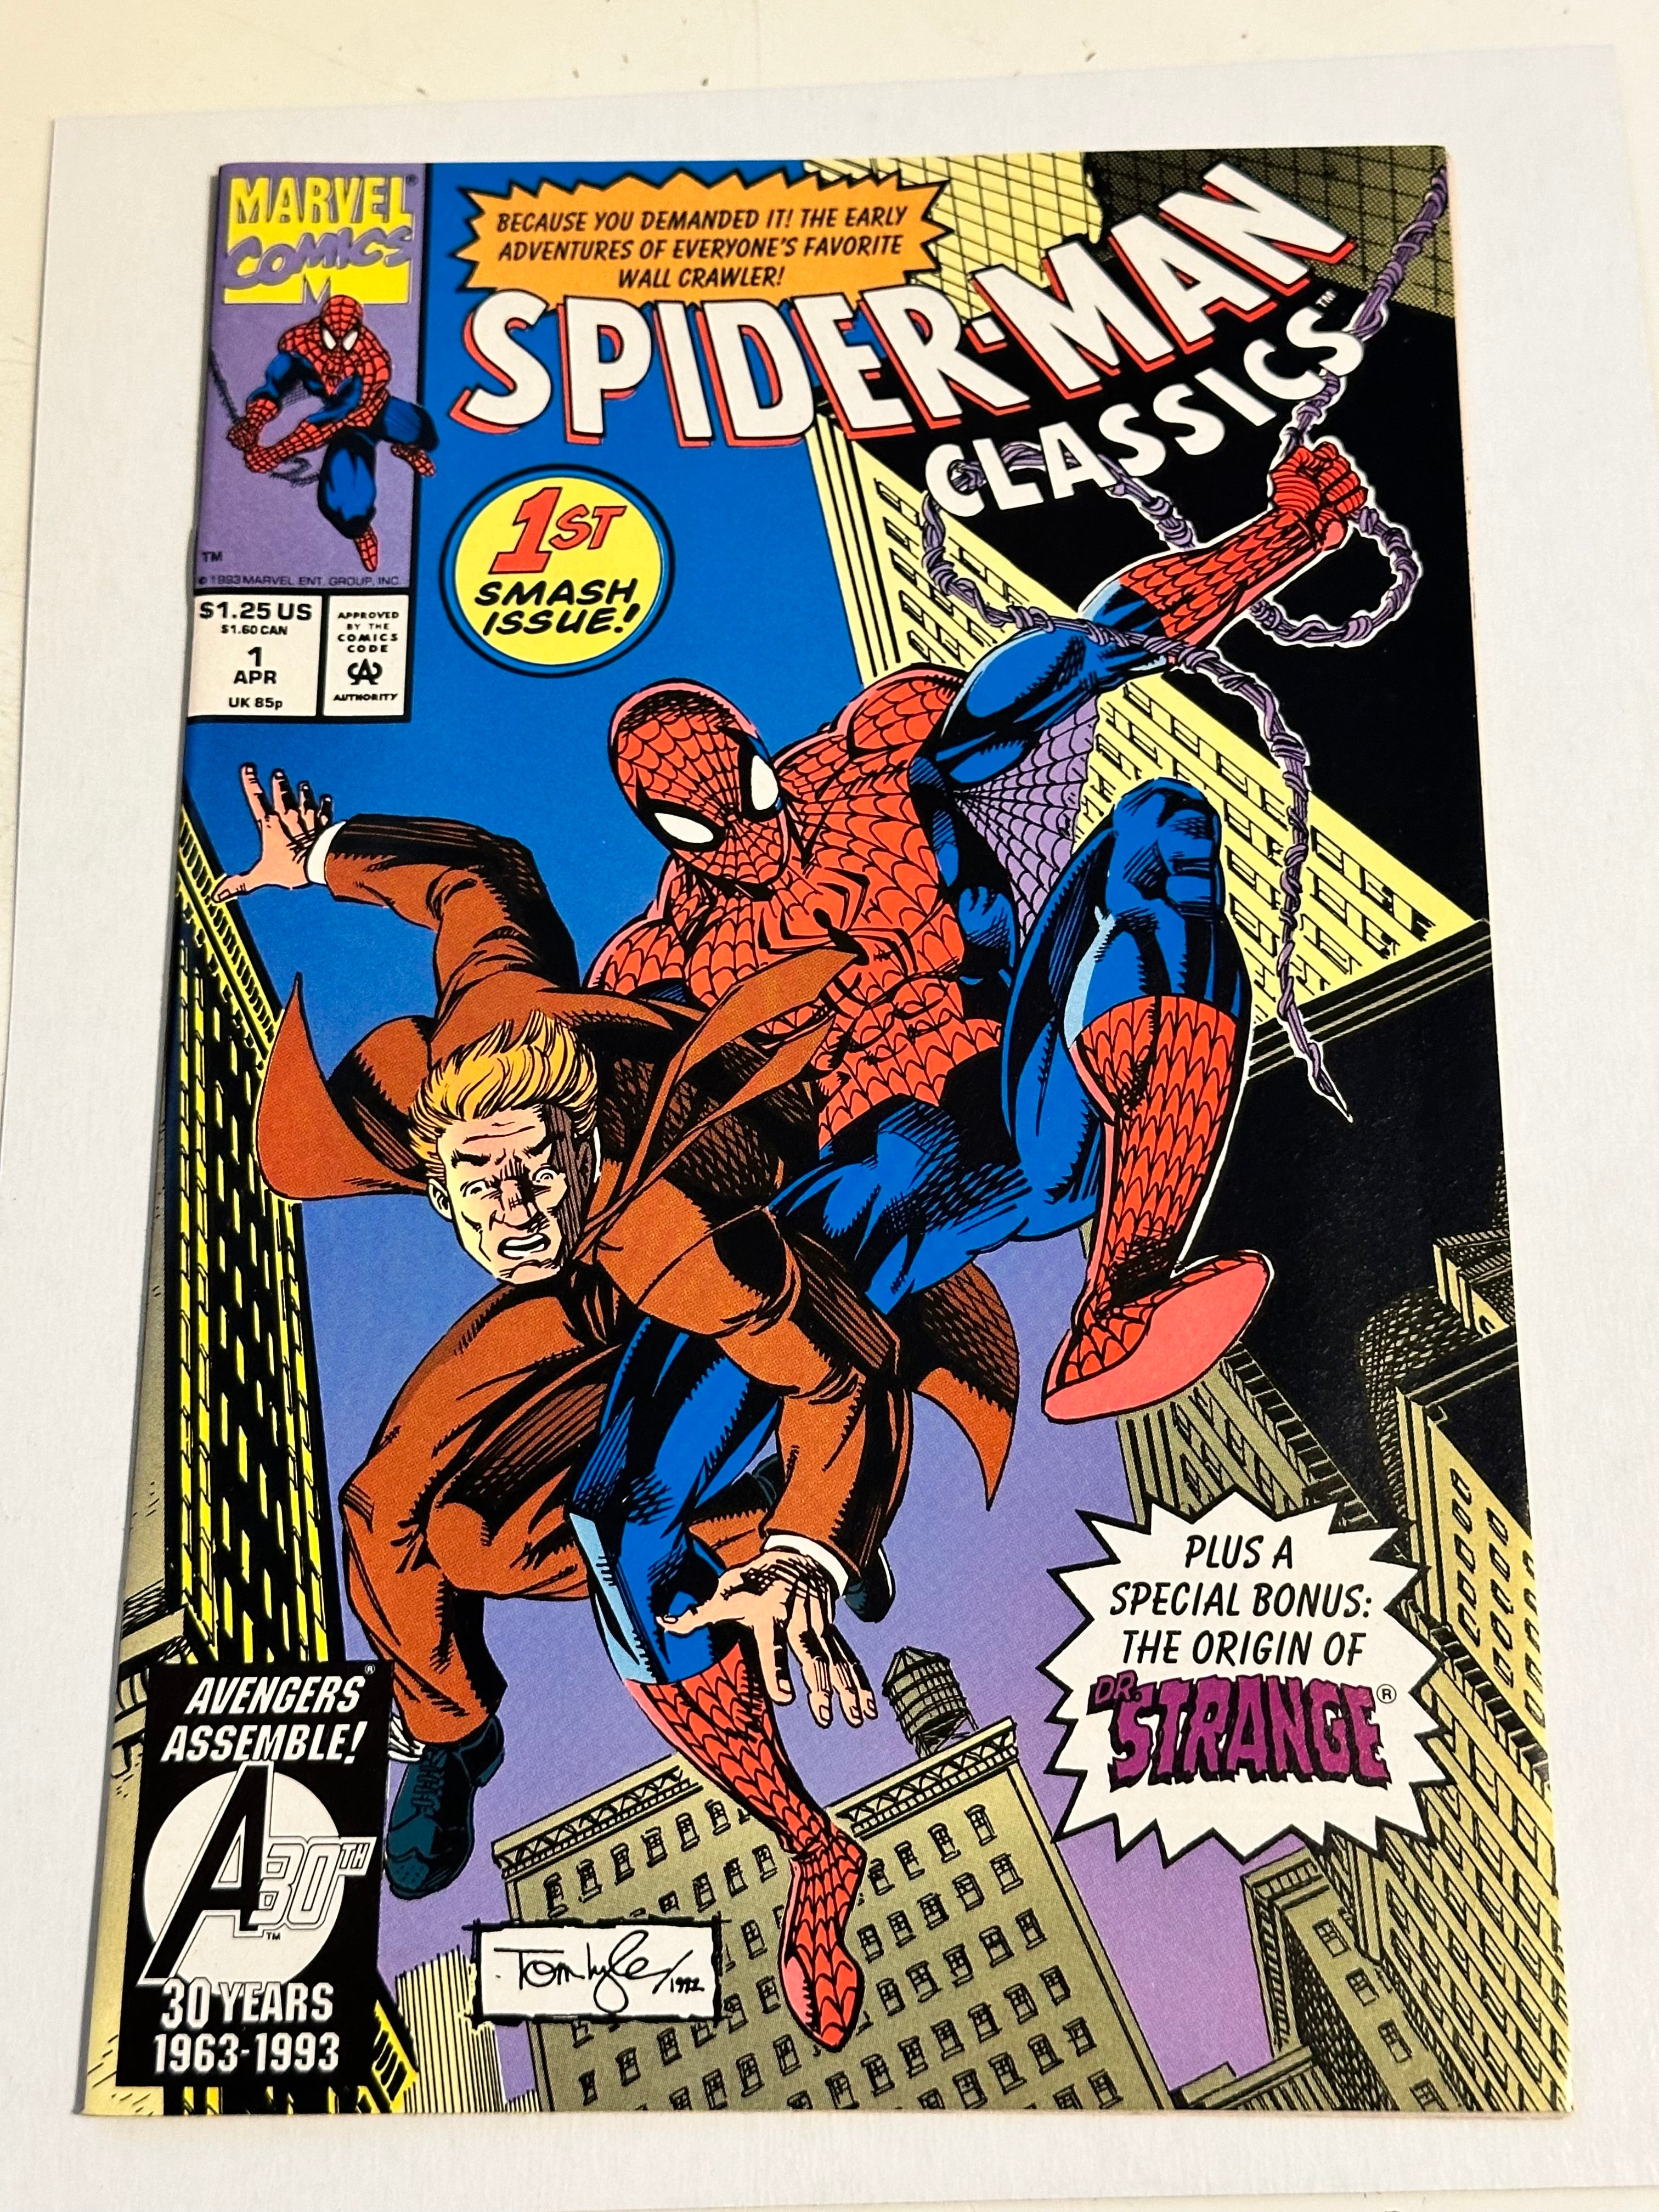 Spider-Man Classics, first issue, high-grade condition, marvel comic